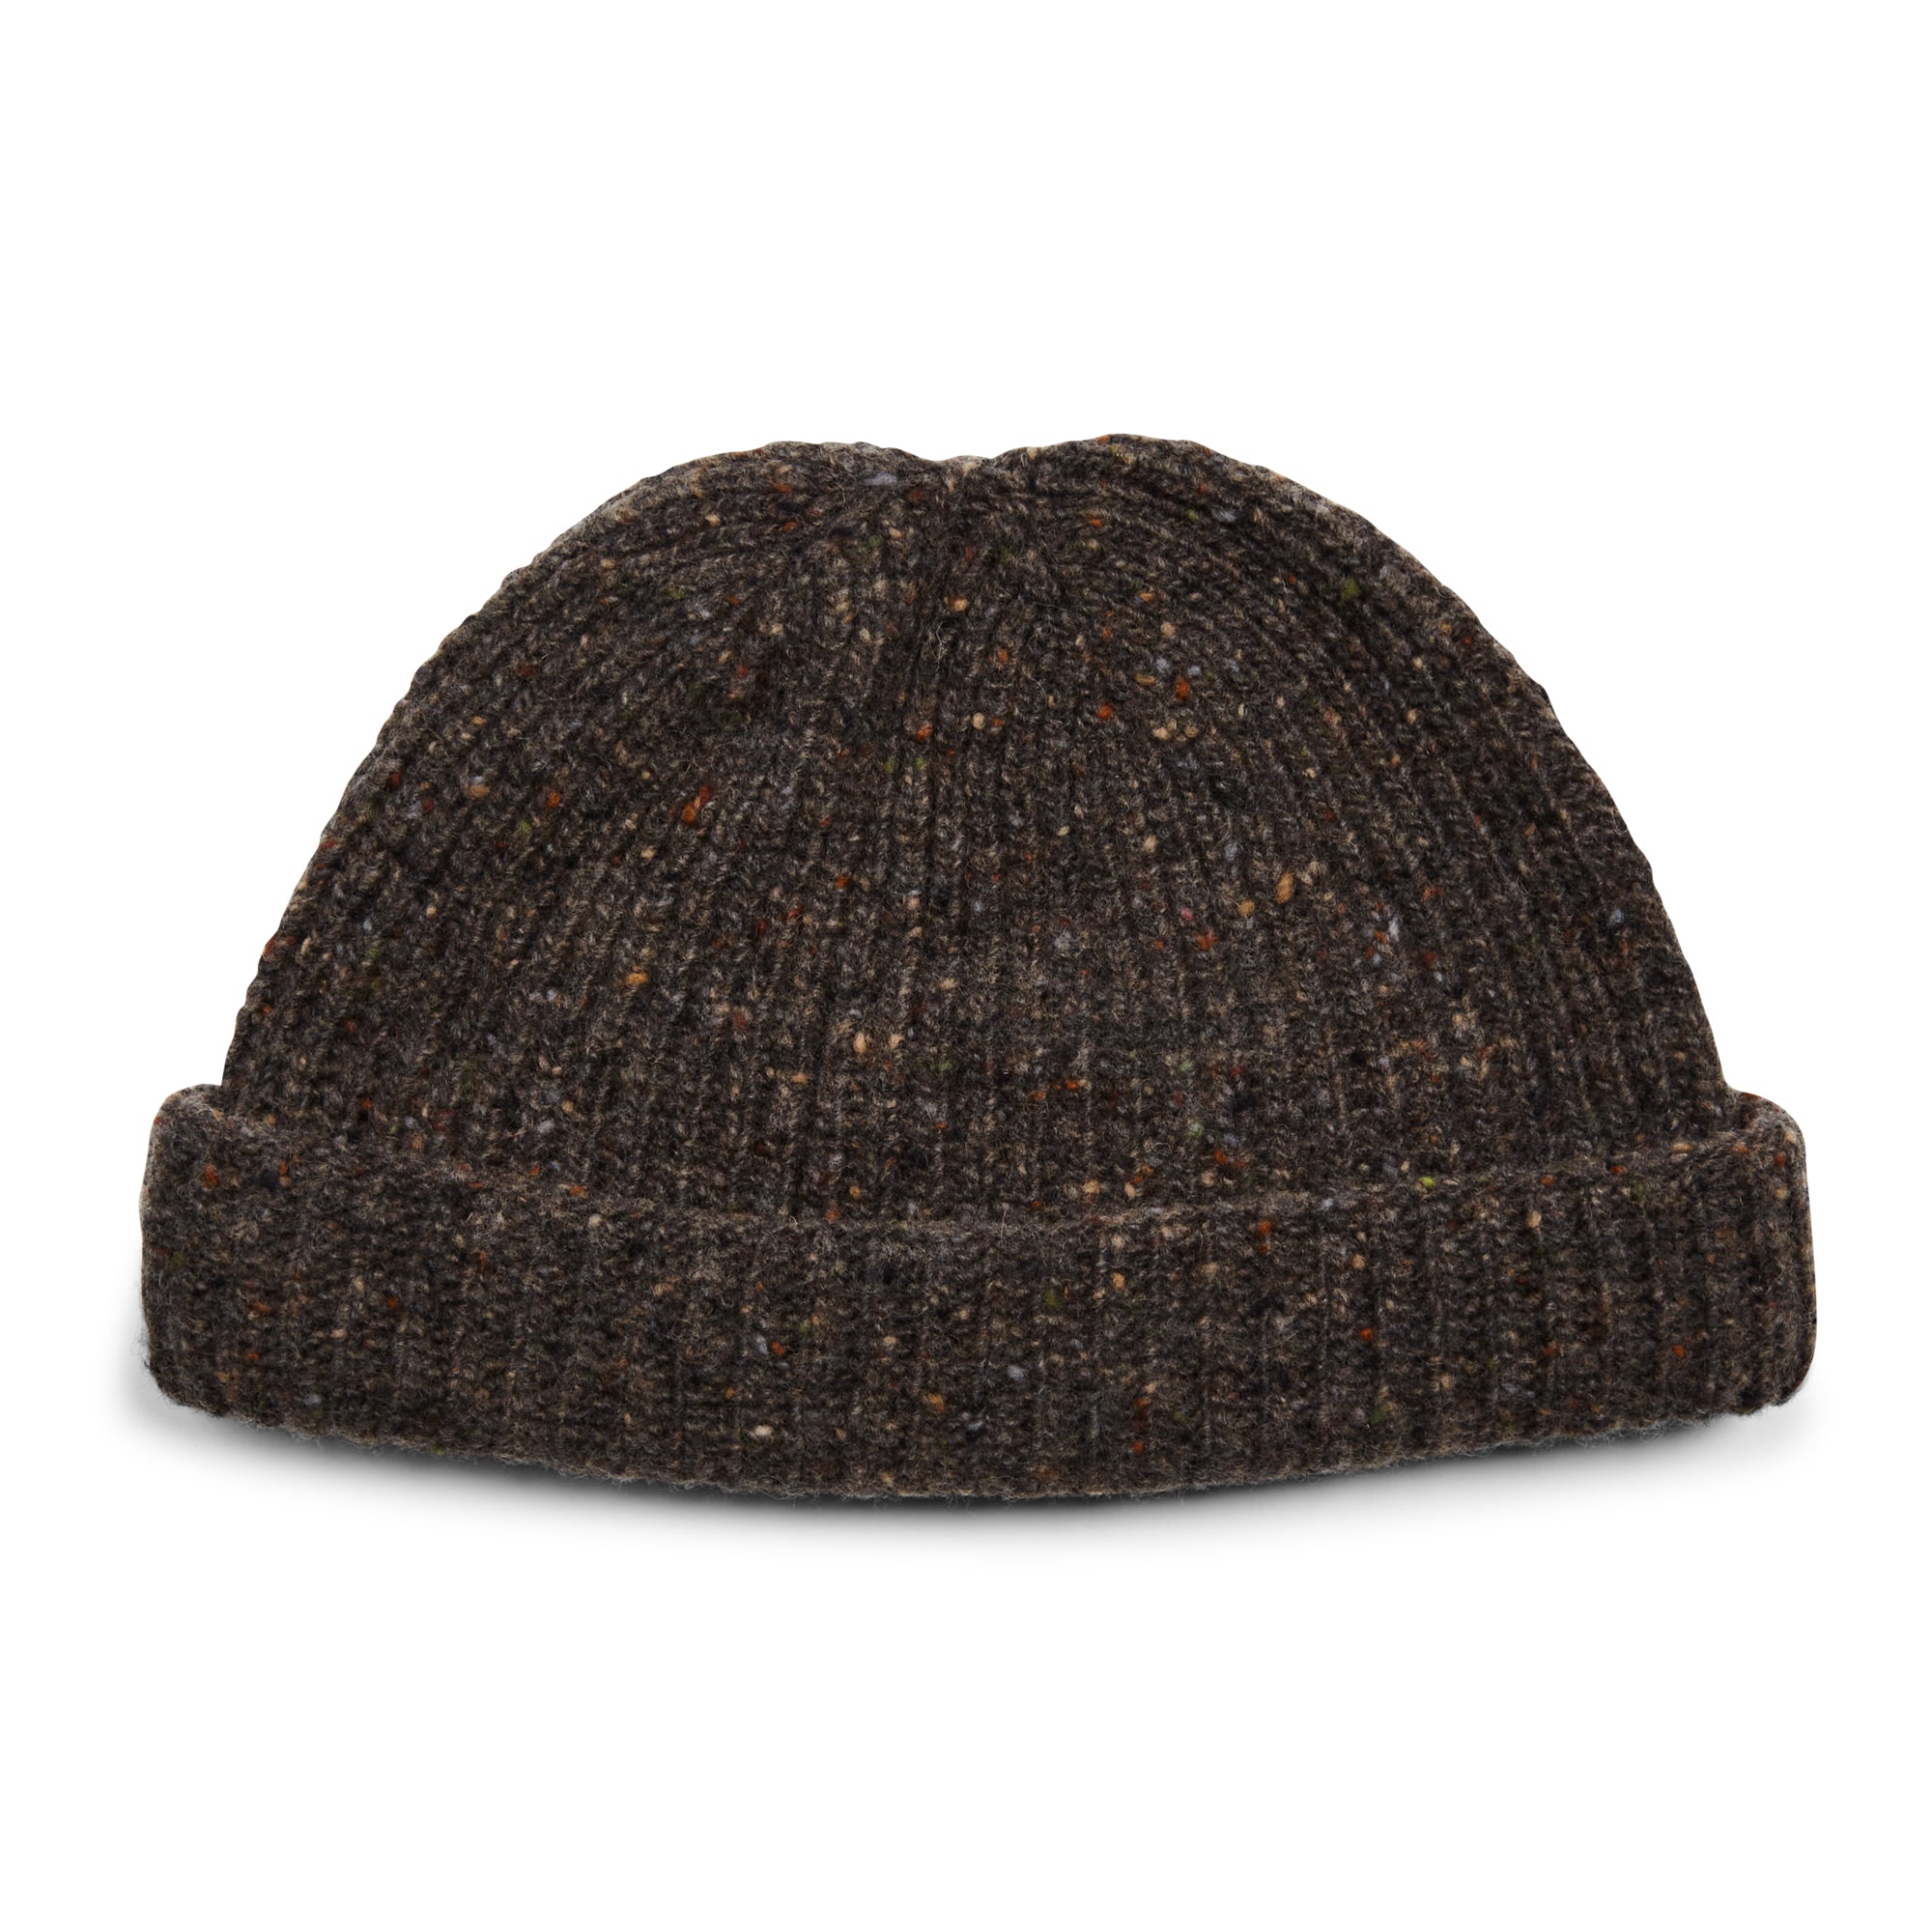 Burrows & Hare  Donegal Beanie Hat - Charcoal